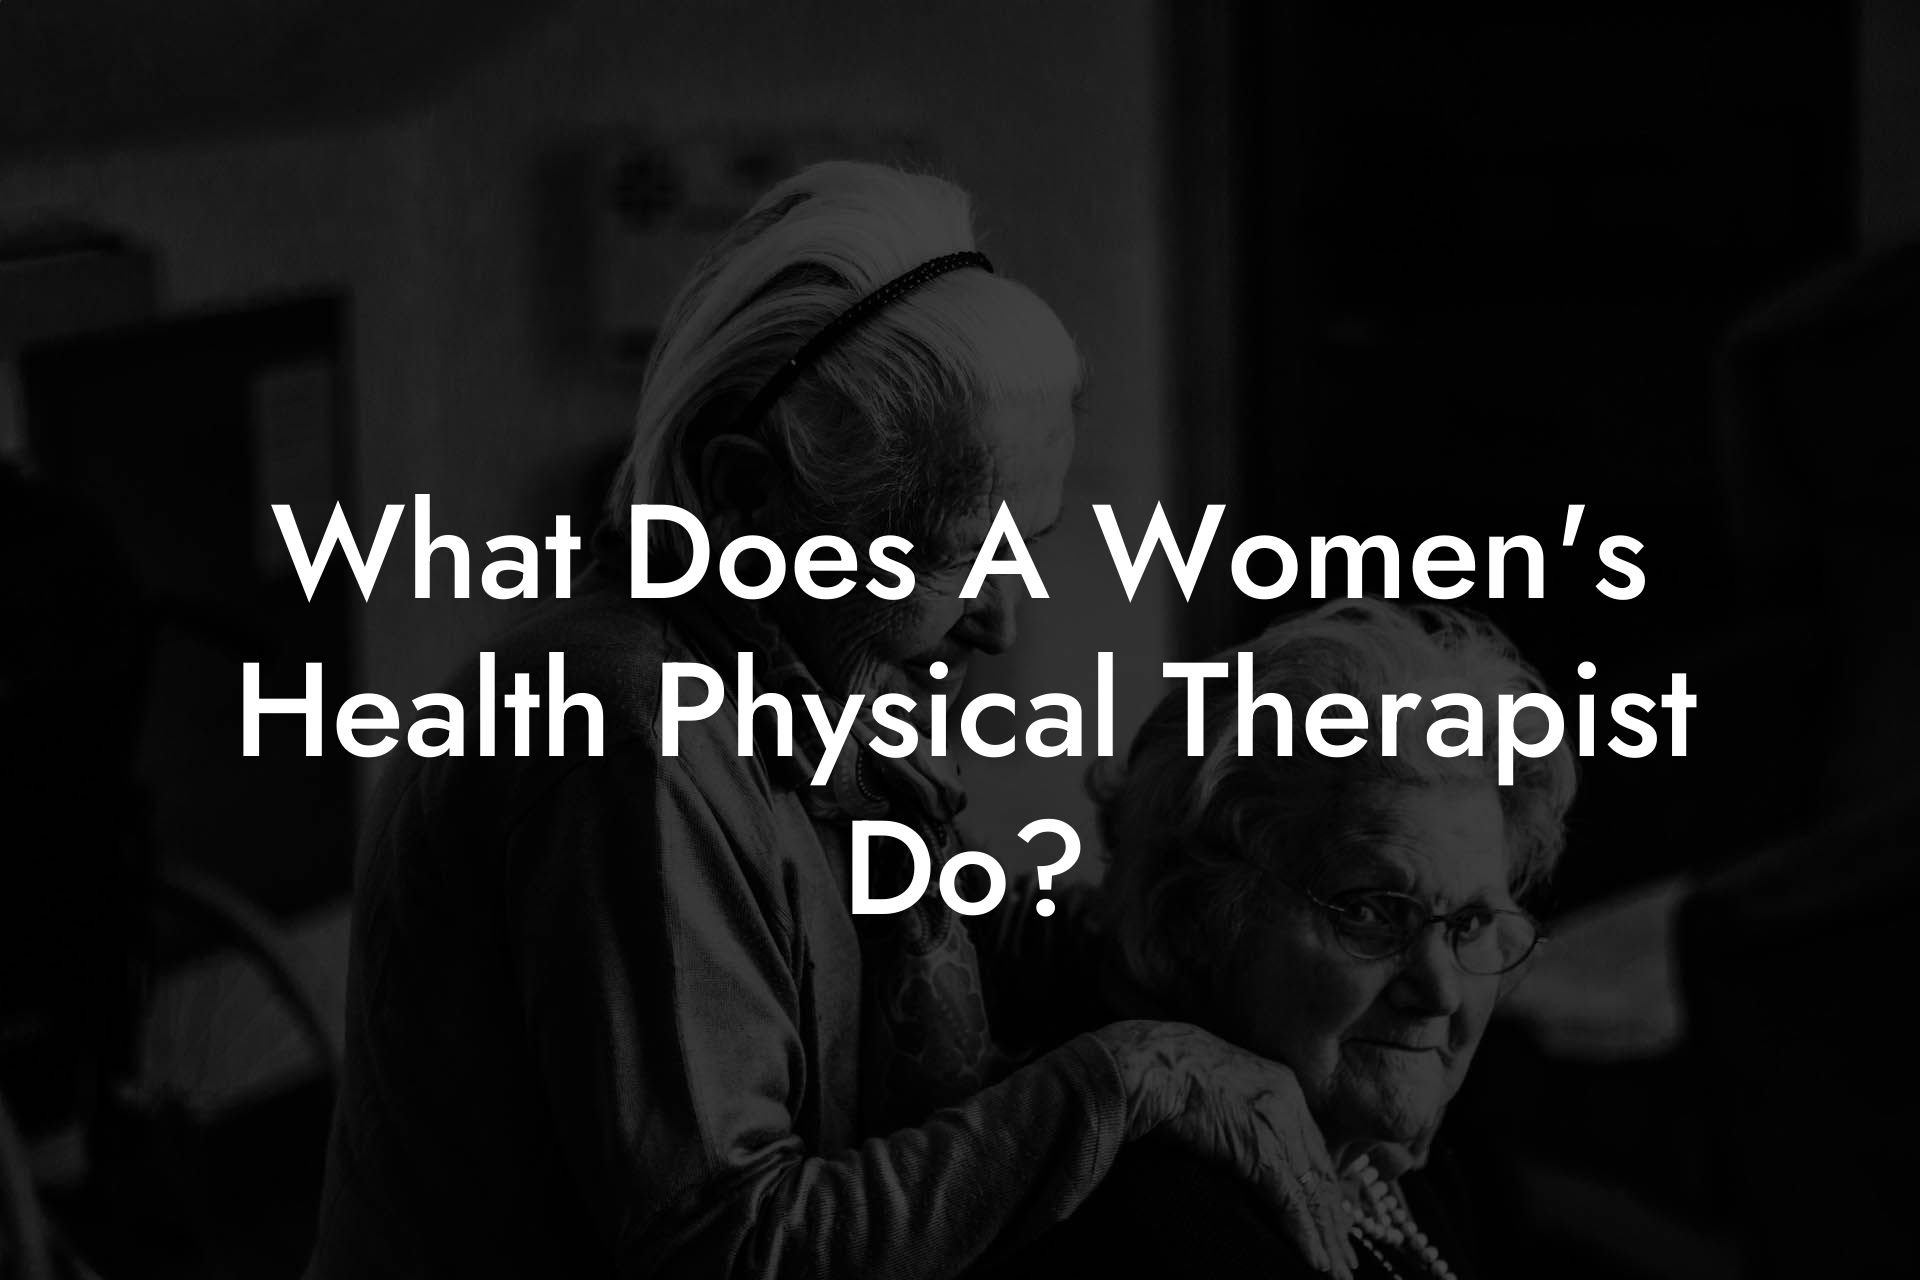 What Does A Women's Health Physical Therapist Do?